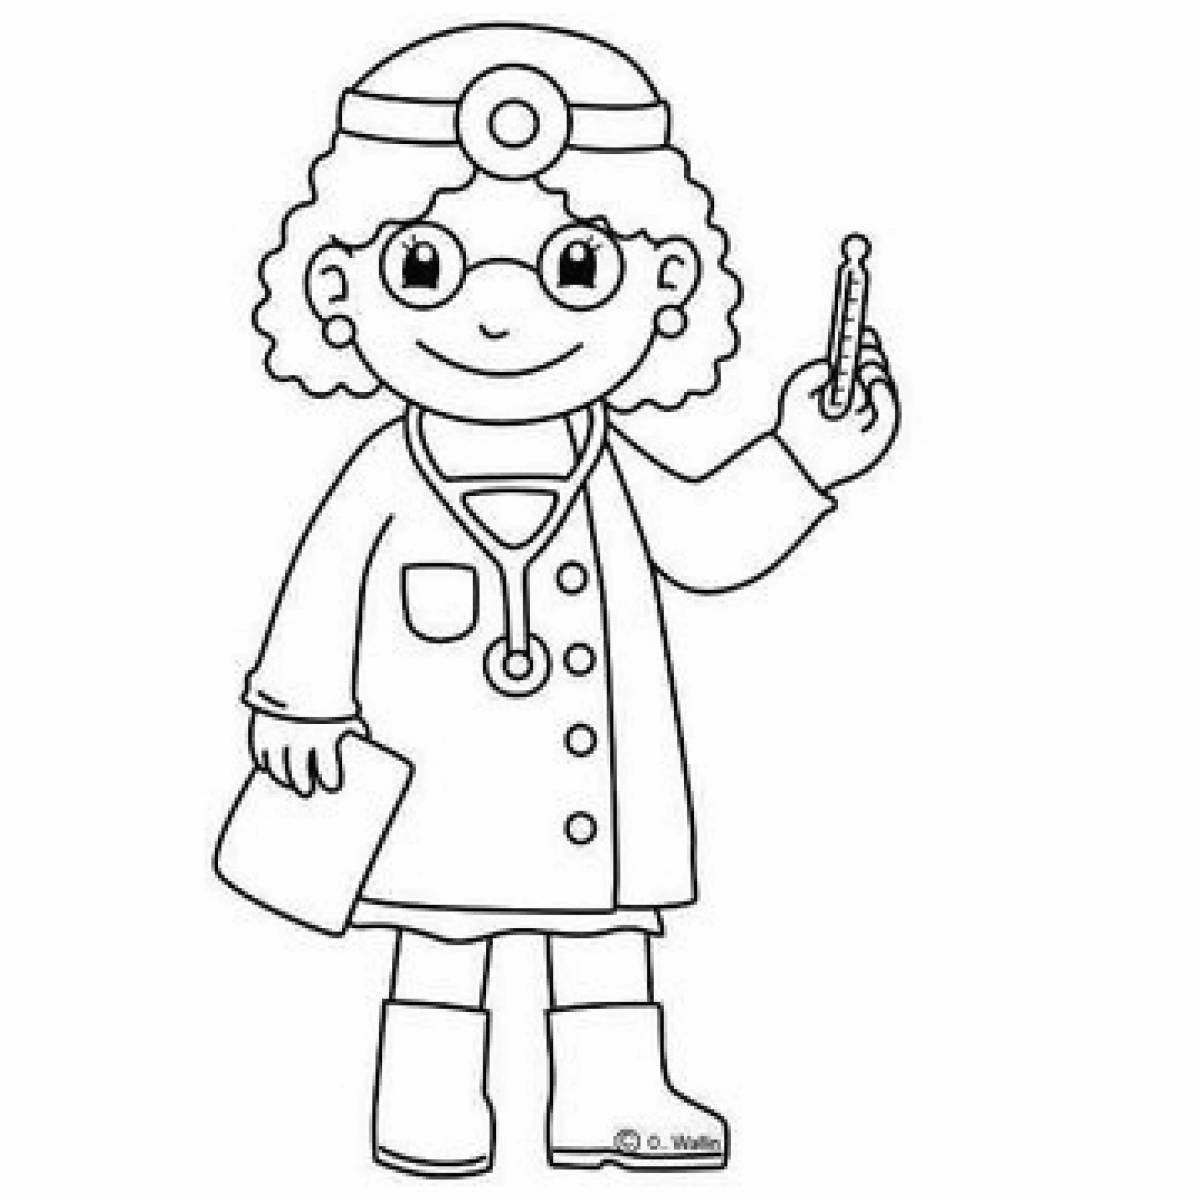 Colorful doctor profession coloring page